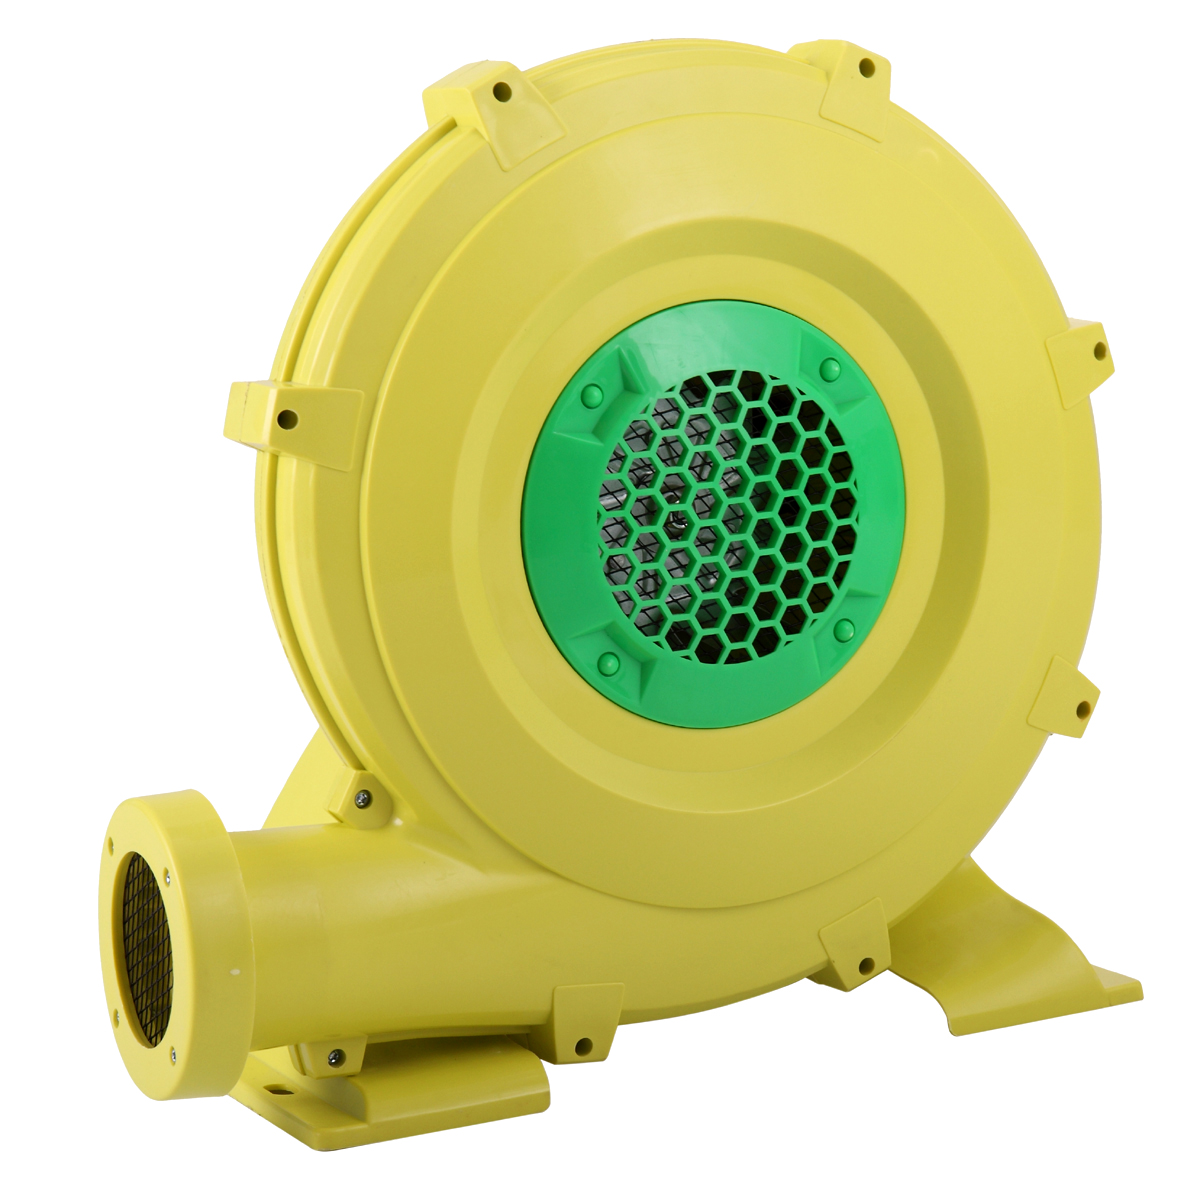 Nyeekoy 680W Air Blower for Inflatable Bounce House, Pump Fan forJumper, Water Slides, Bouncy Castle TH17S0187 10